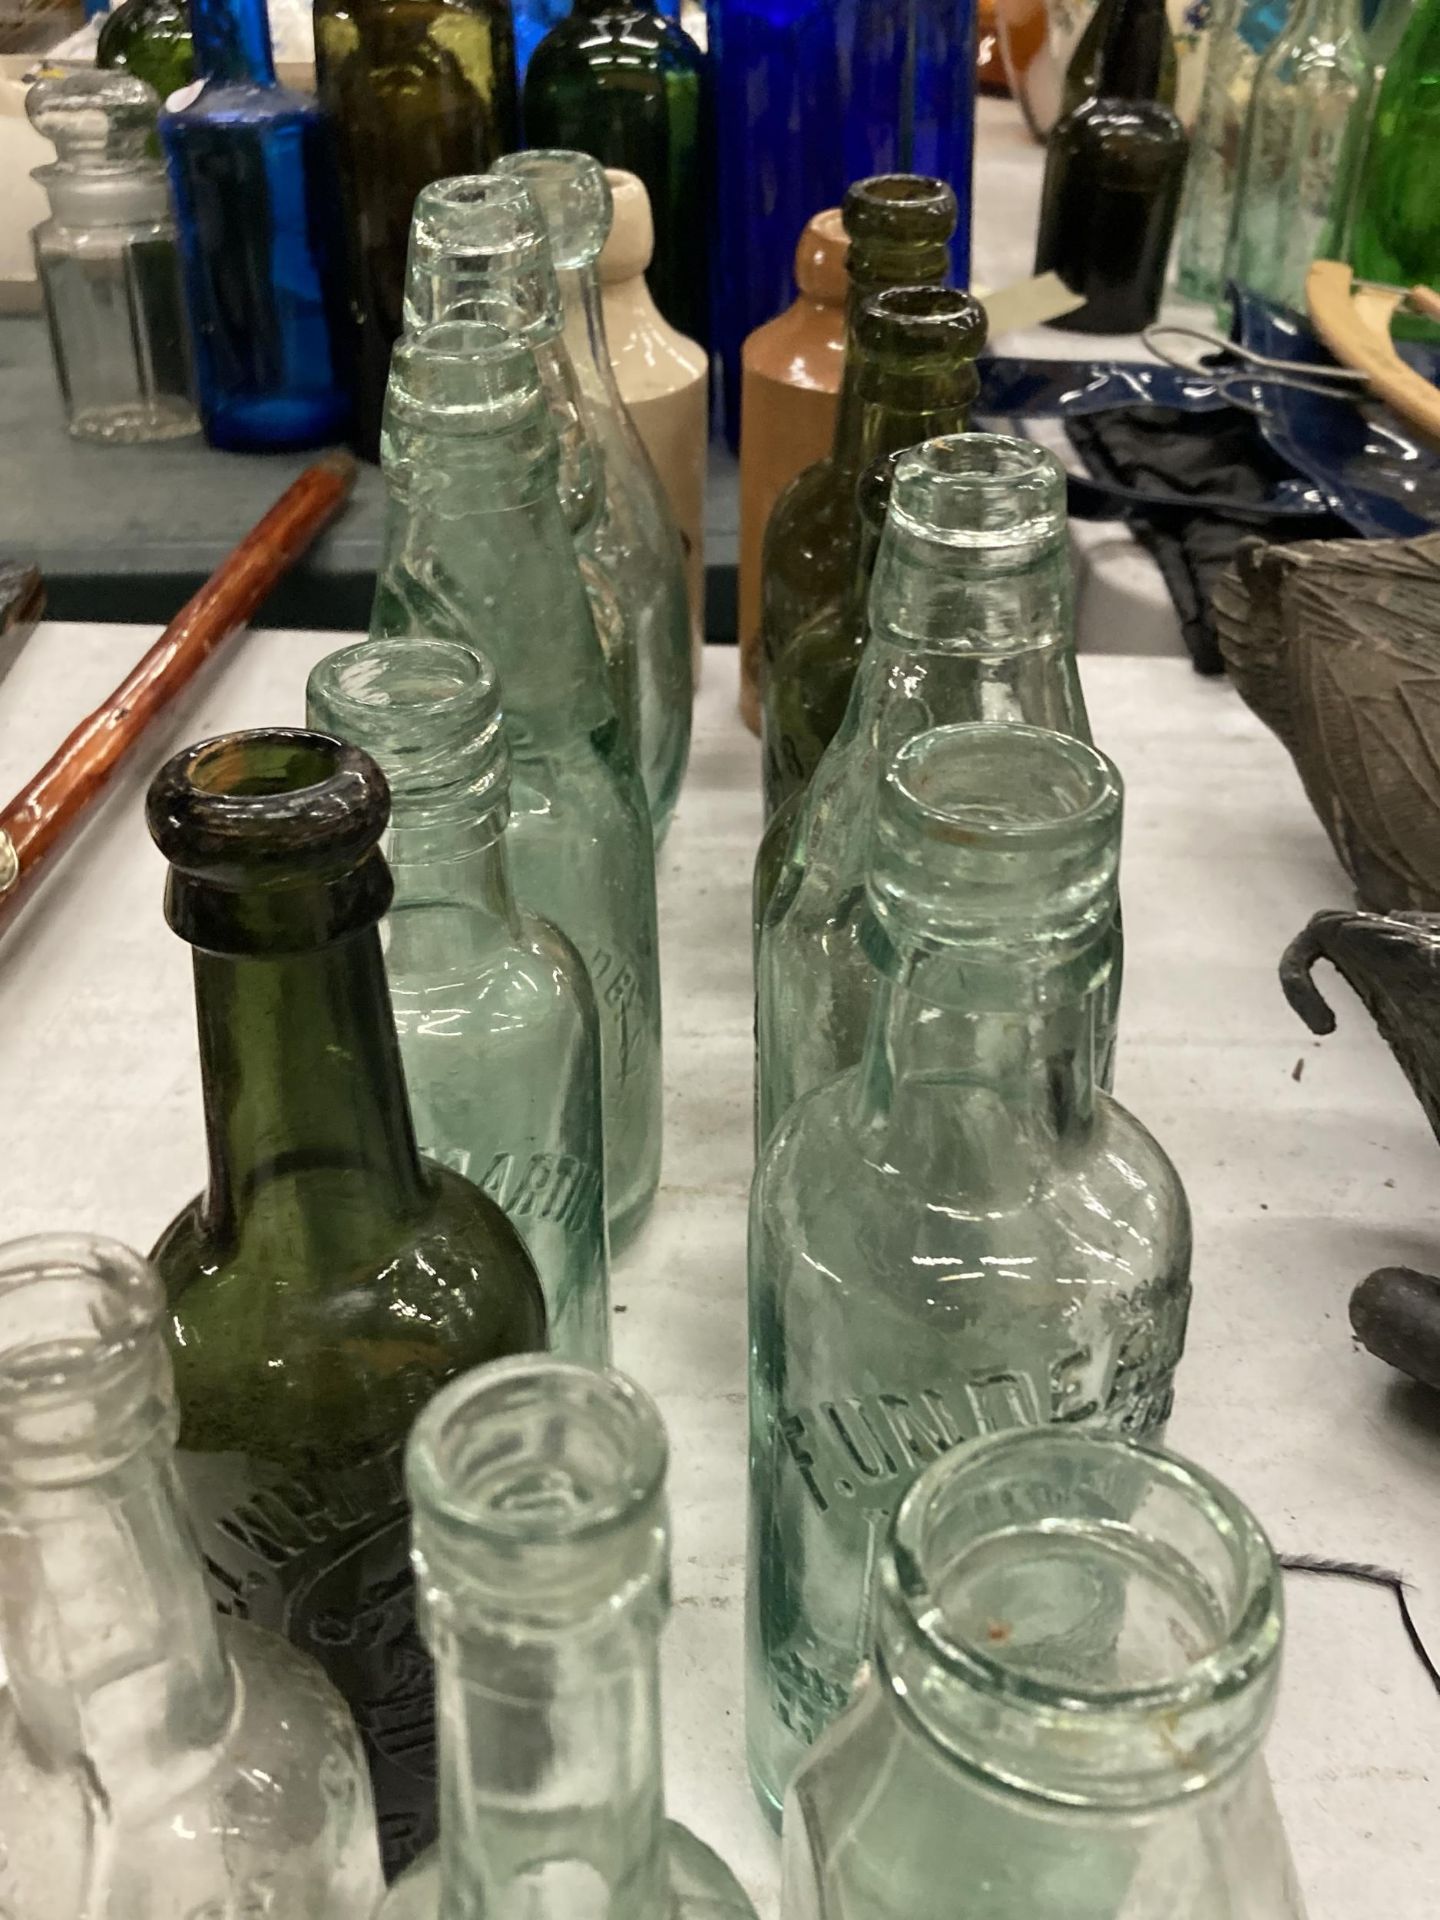 A COLLECTION OF VINTAGE GLASS BOTTLES WITH ADVERTISING ON THEM PLUS TWO STONE ONES - Image 3 of 4